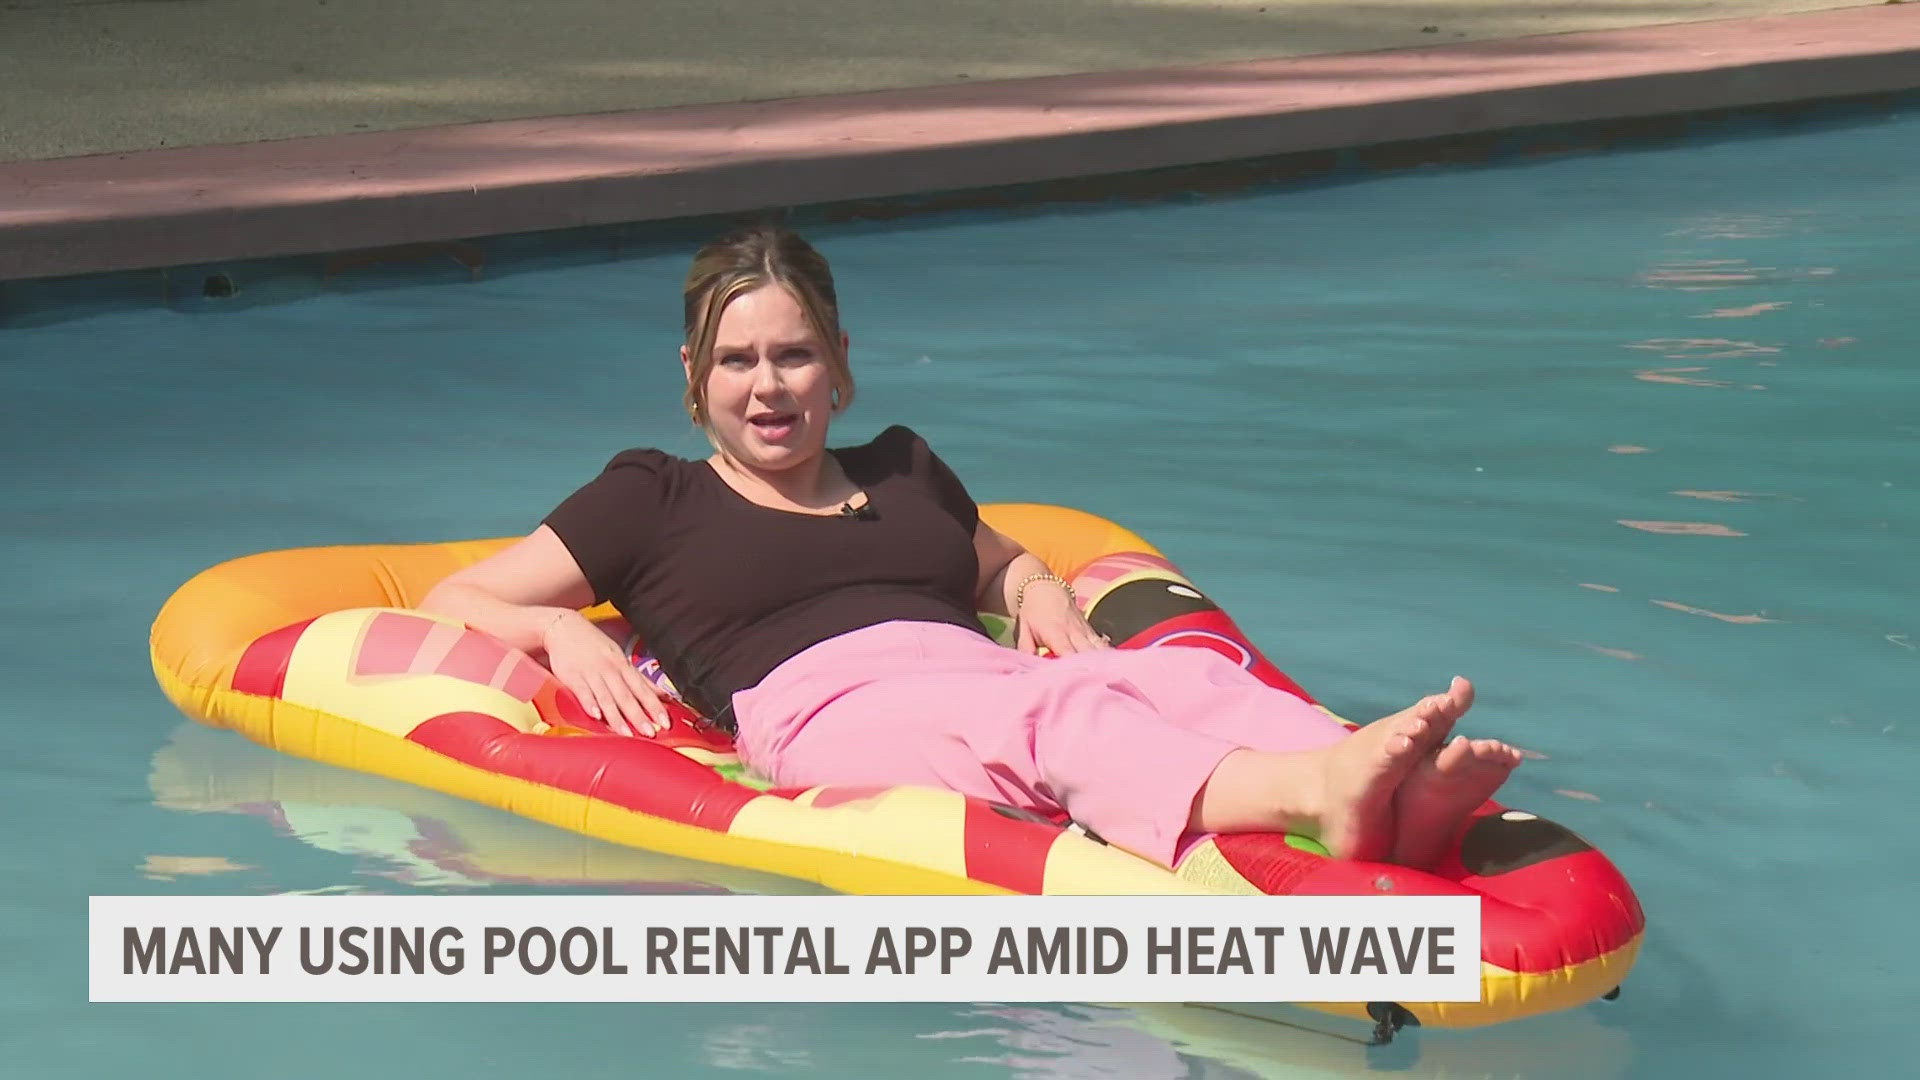 Thousands will hit the lake or their backyard pool this weekend, but there may be another option to help you cool off right next door.